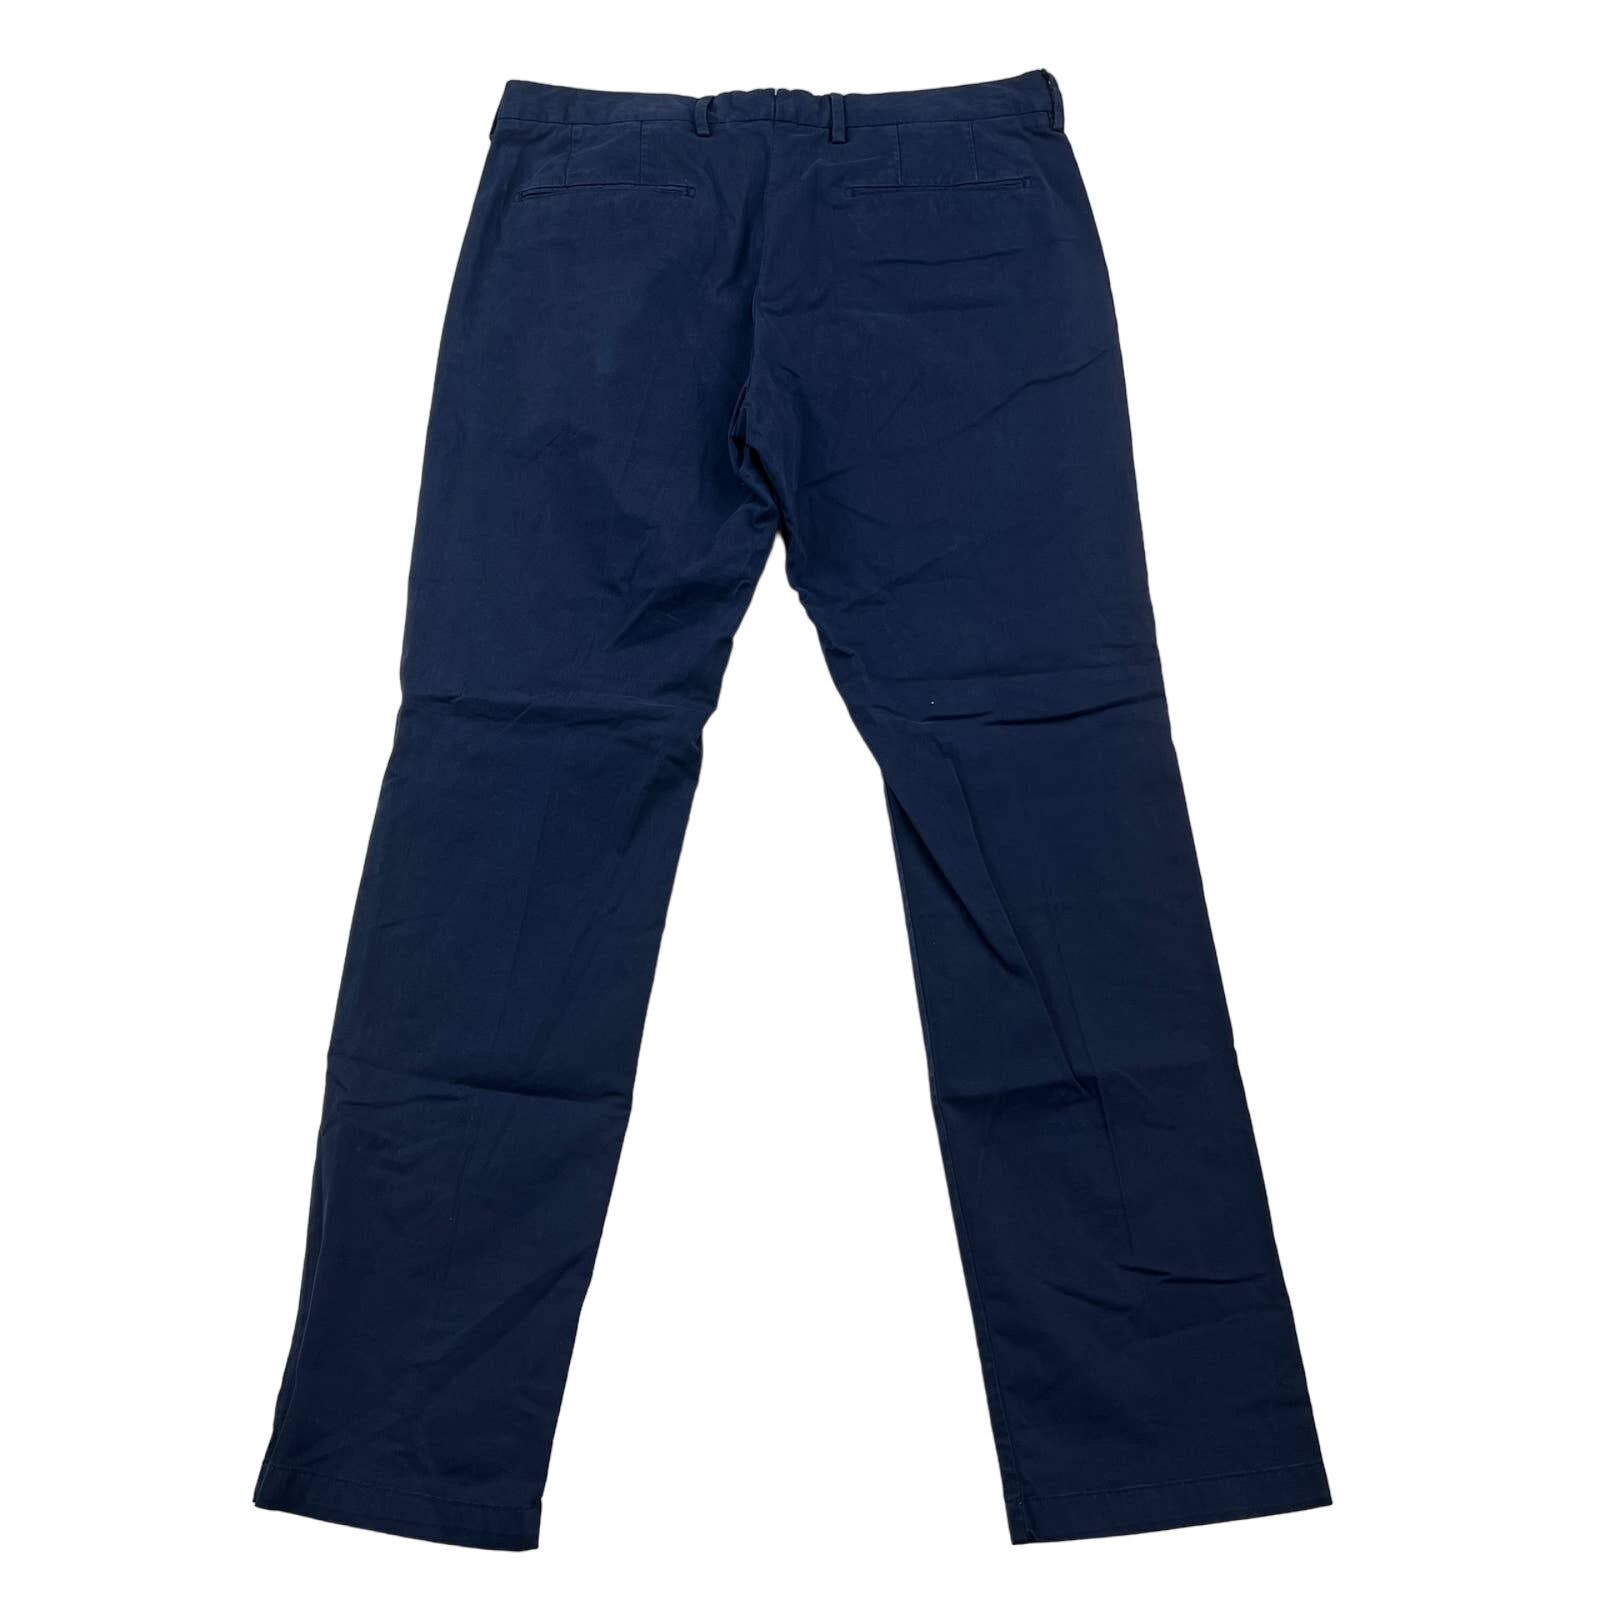 Dylan Gray Men Navy Blue Chinos Pants US 34 Classic Straight